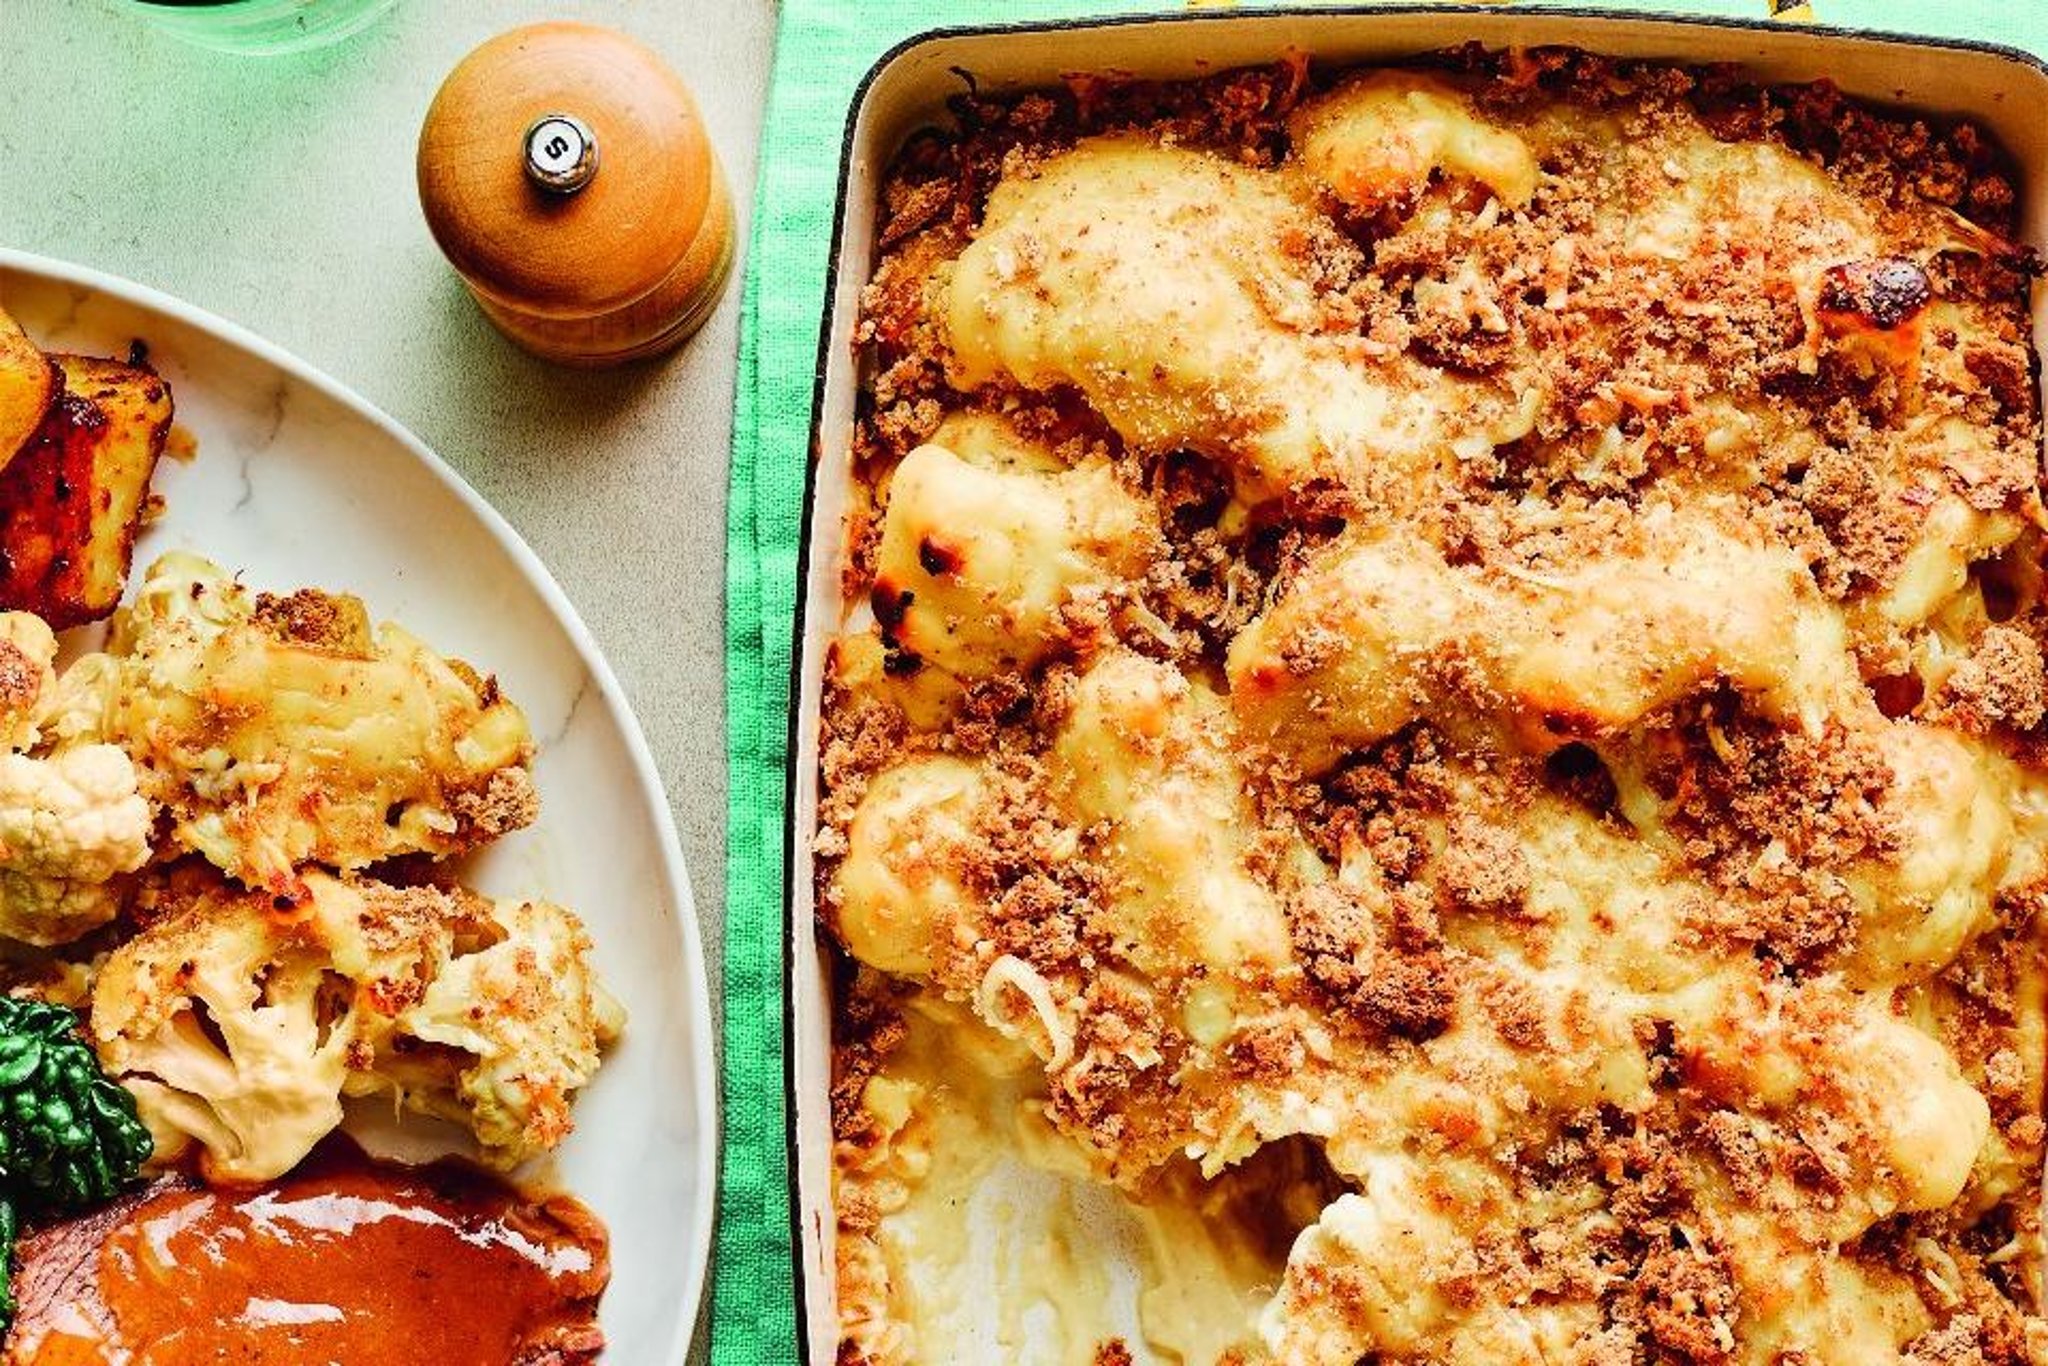 Loaded cauliflower cheese recipe from the new Pinch of Nom book